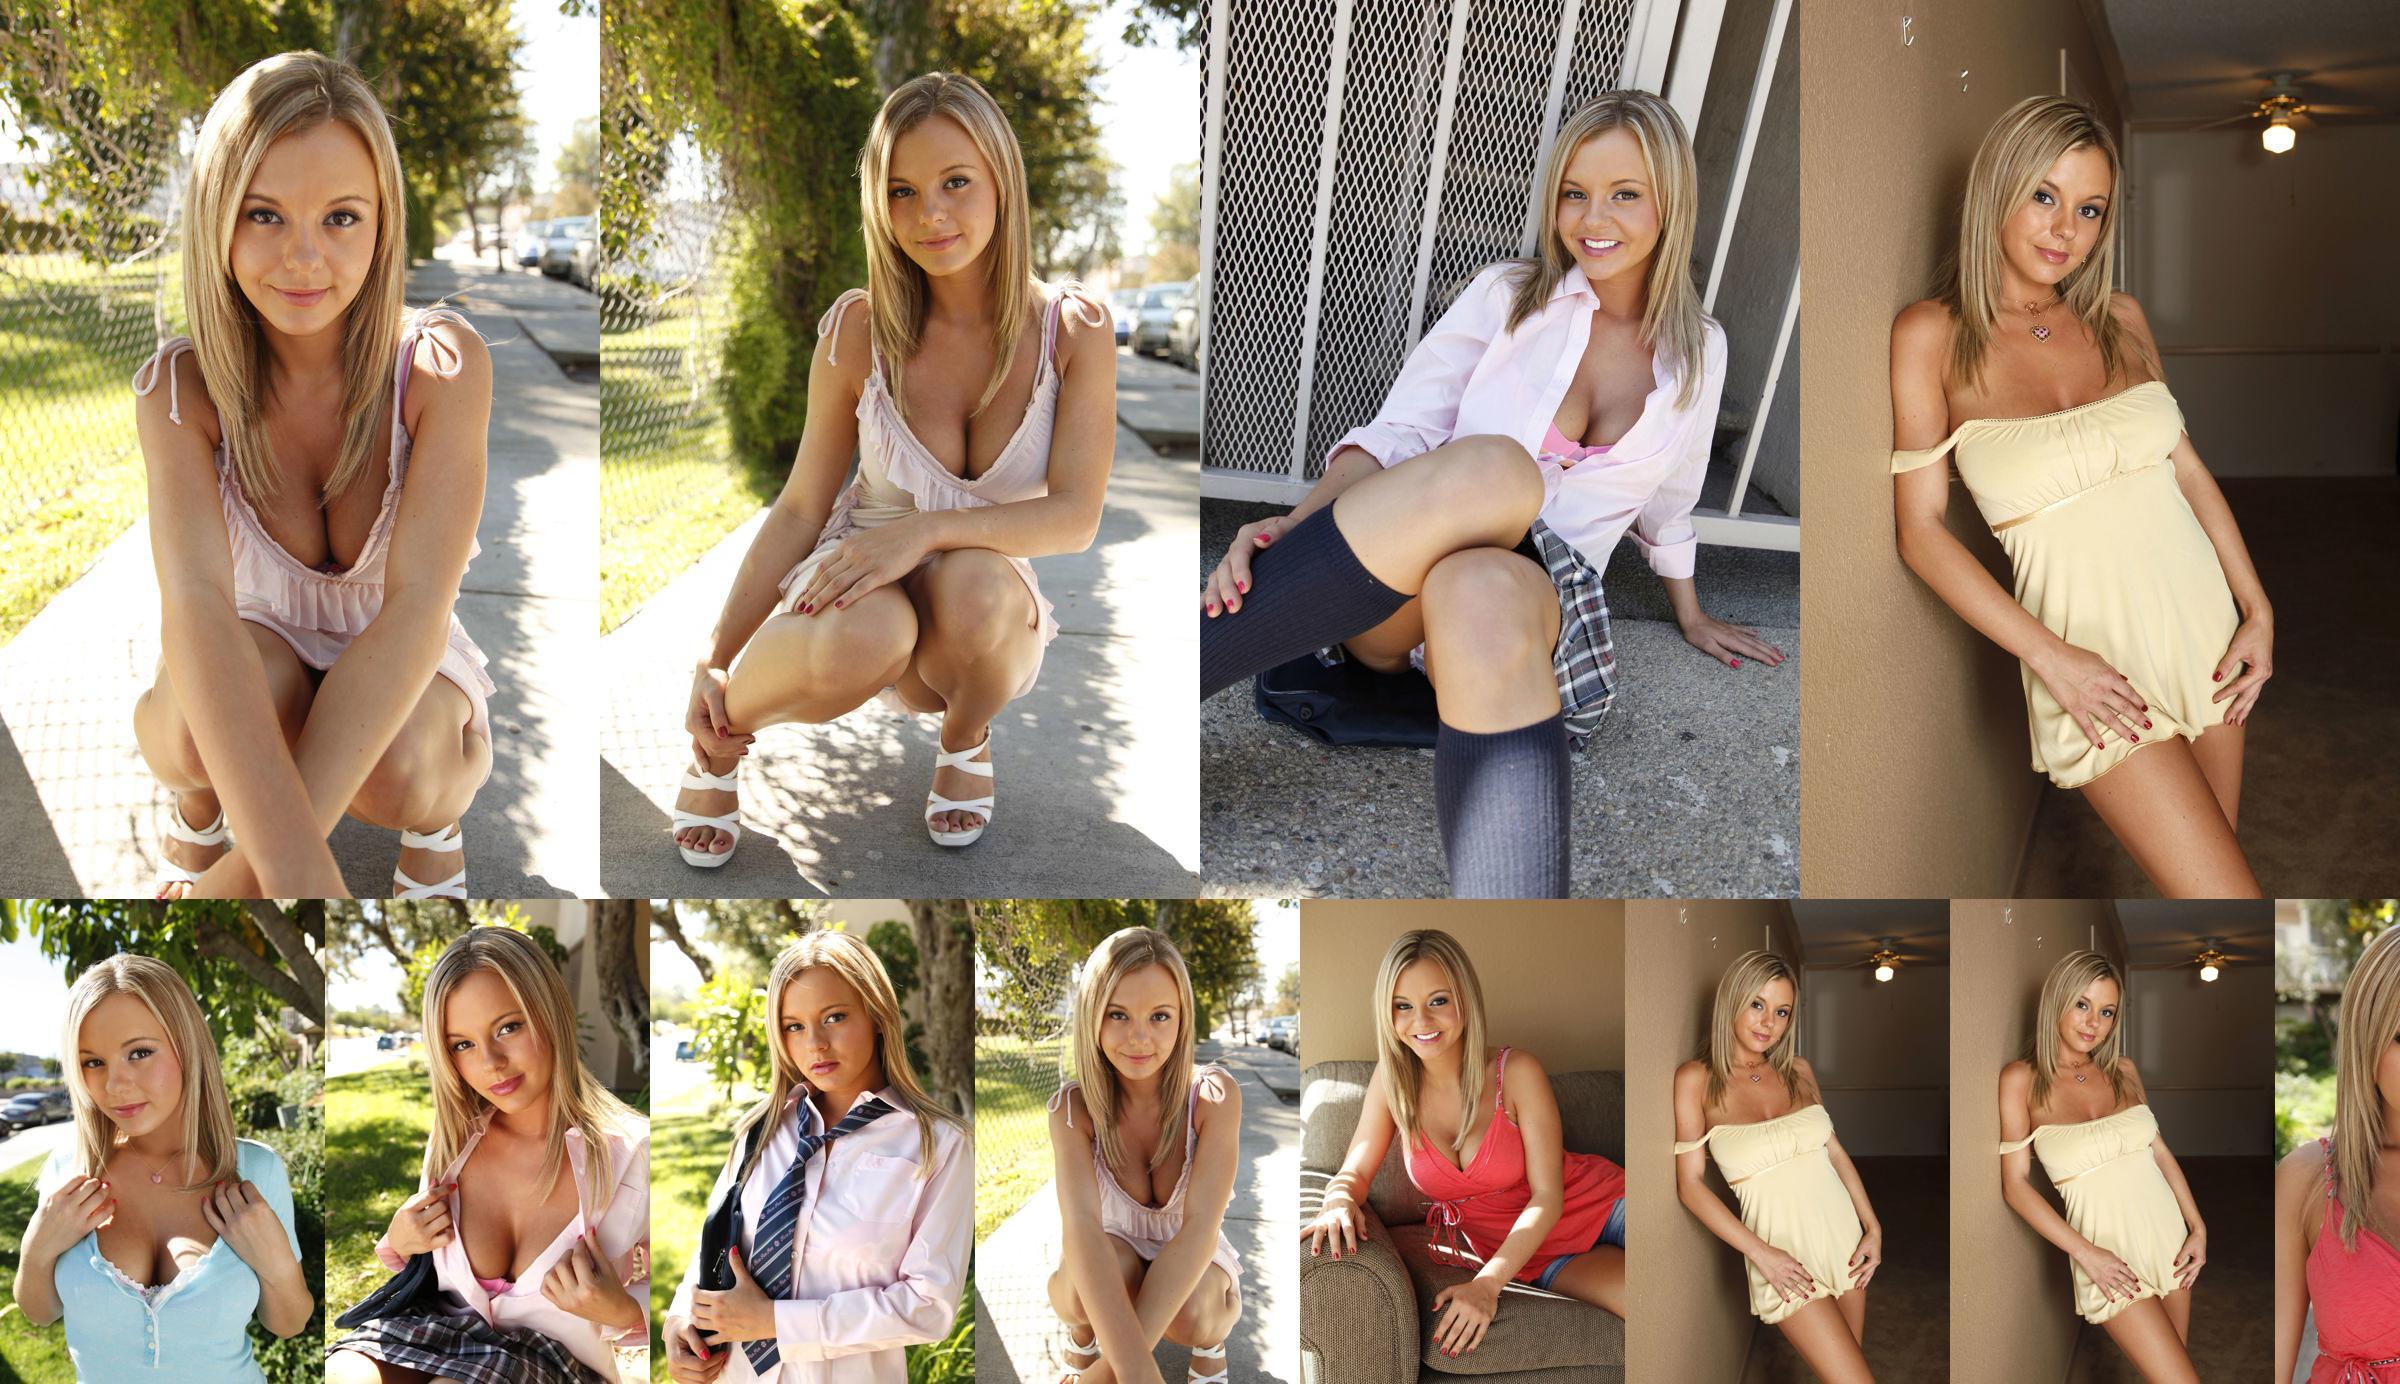 [LOVEPOP] Belle FILLE d'outre-mer - Bree Olson パツキン Uniform Girl - PPV No.dd739c Page 12